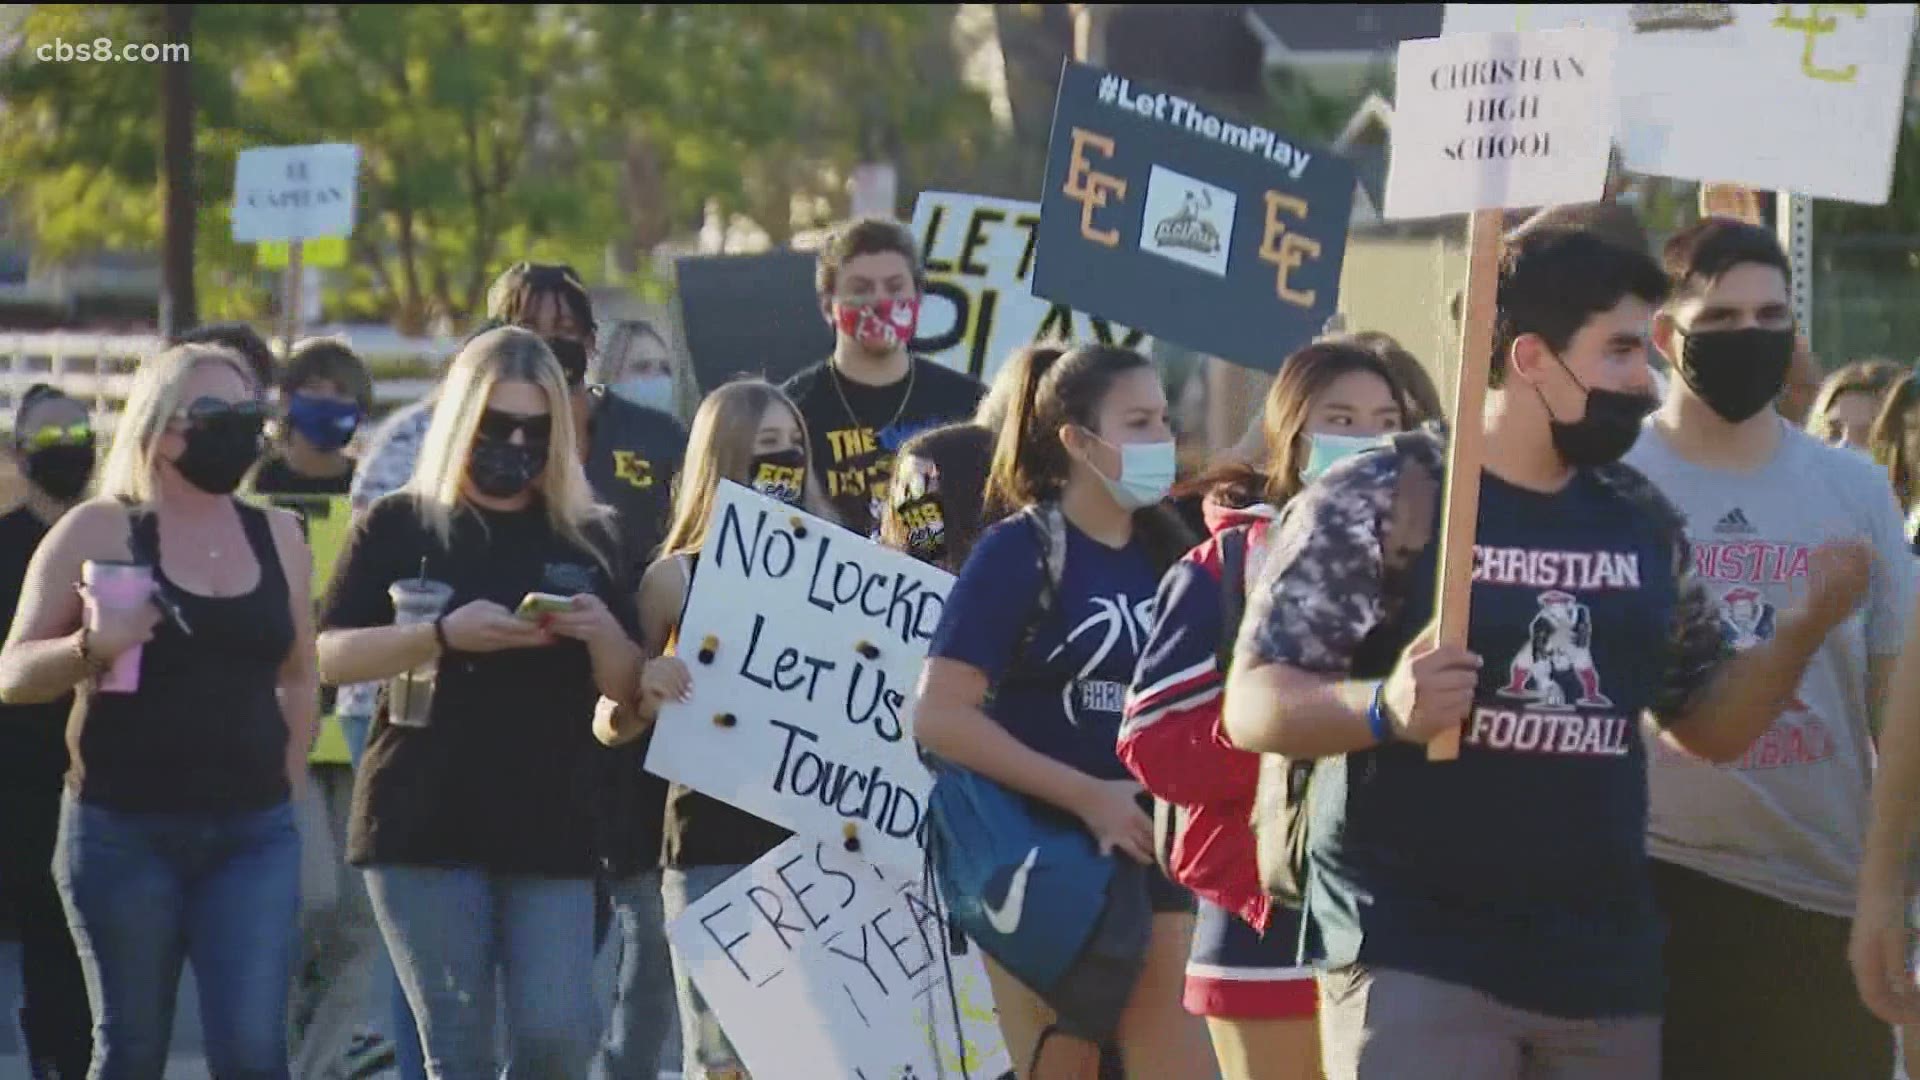 On Friday there were rallies held across the state including many in San Diego to call on Governor Gavin Newsom to allow sports to resume.